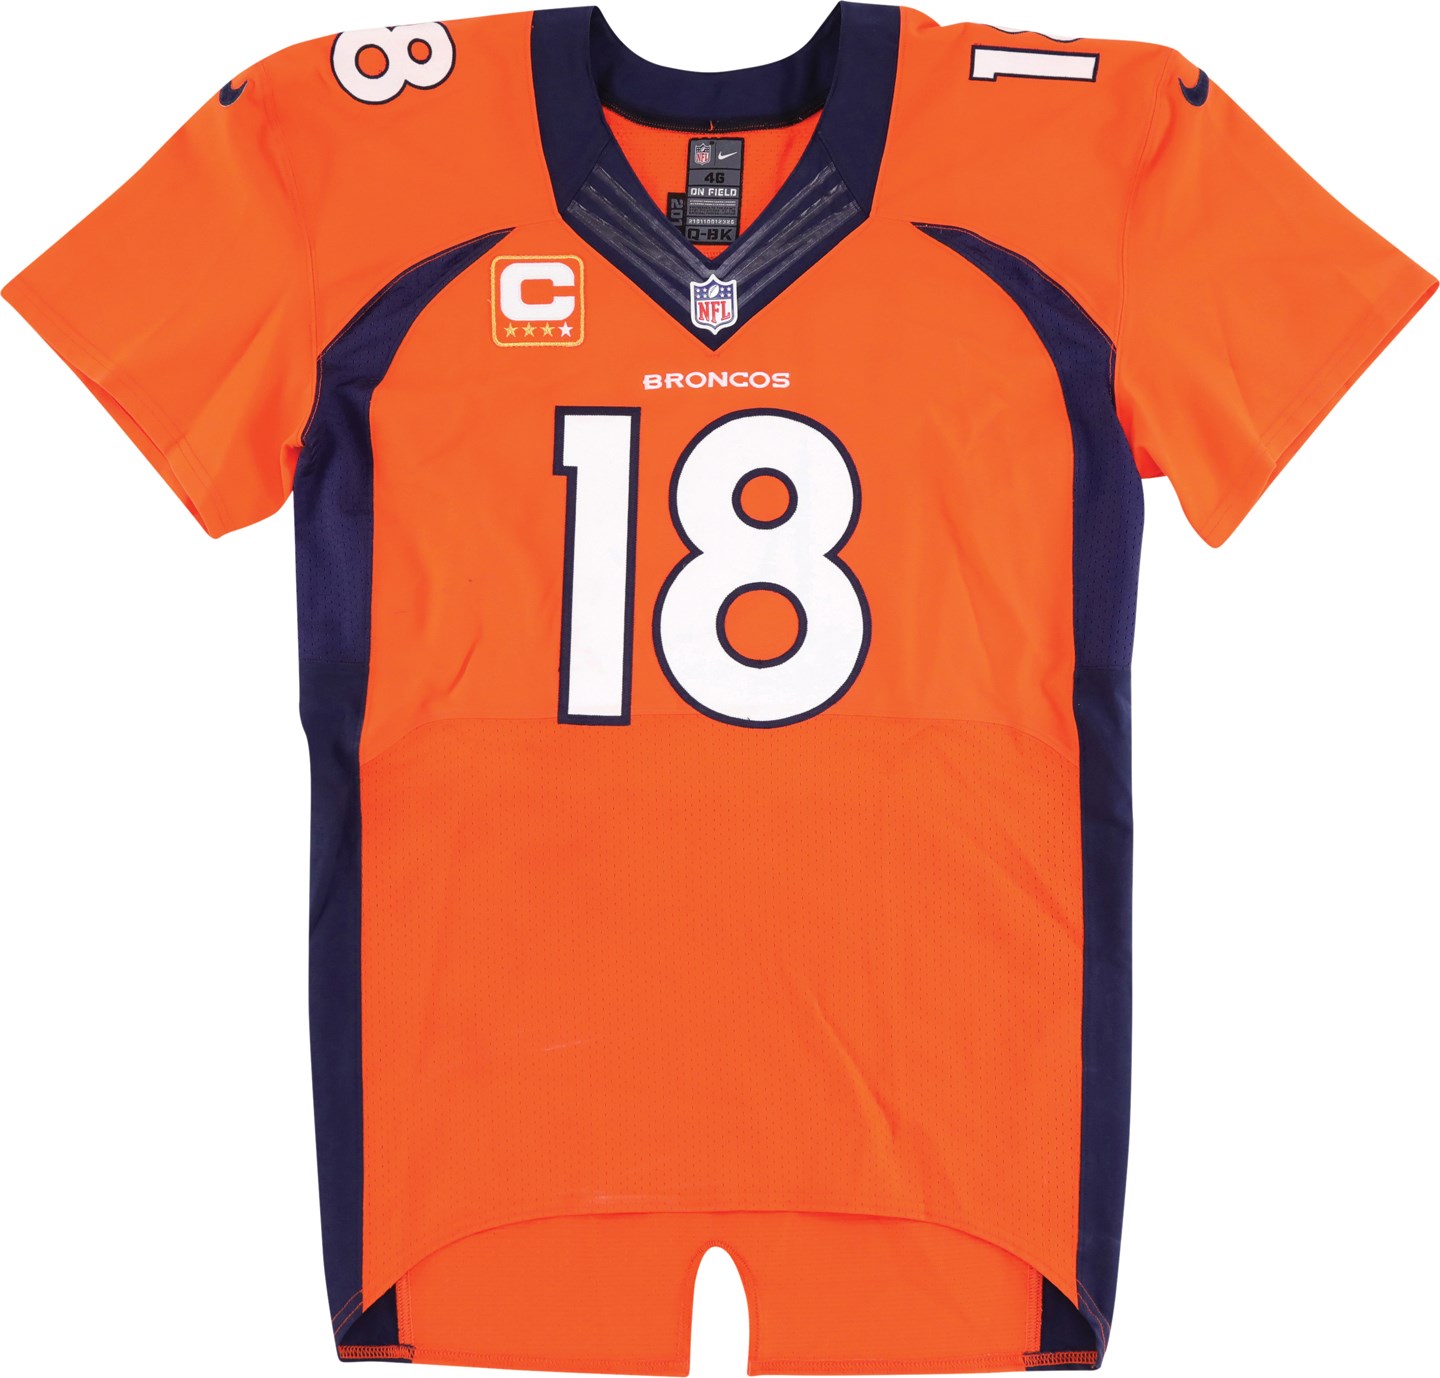 storic 9/7/14 Peyton Manning Denver Broncos Game Worn Jersey - Surpasses 65,000 Passing Yards and Defeats All 32 NFL Teams (Davious Sports Photo-Matched LOA & Team LOA)